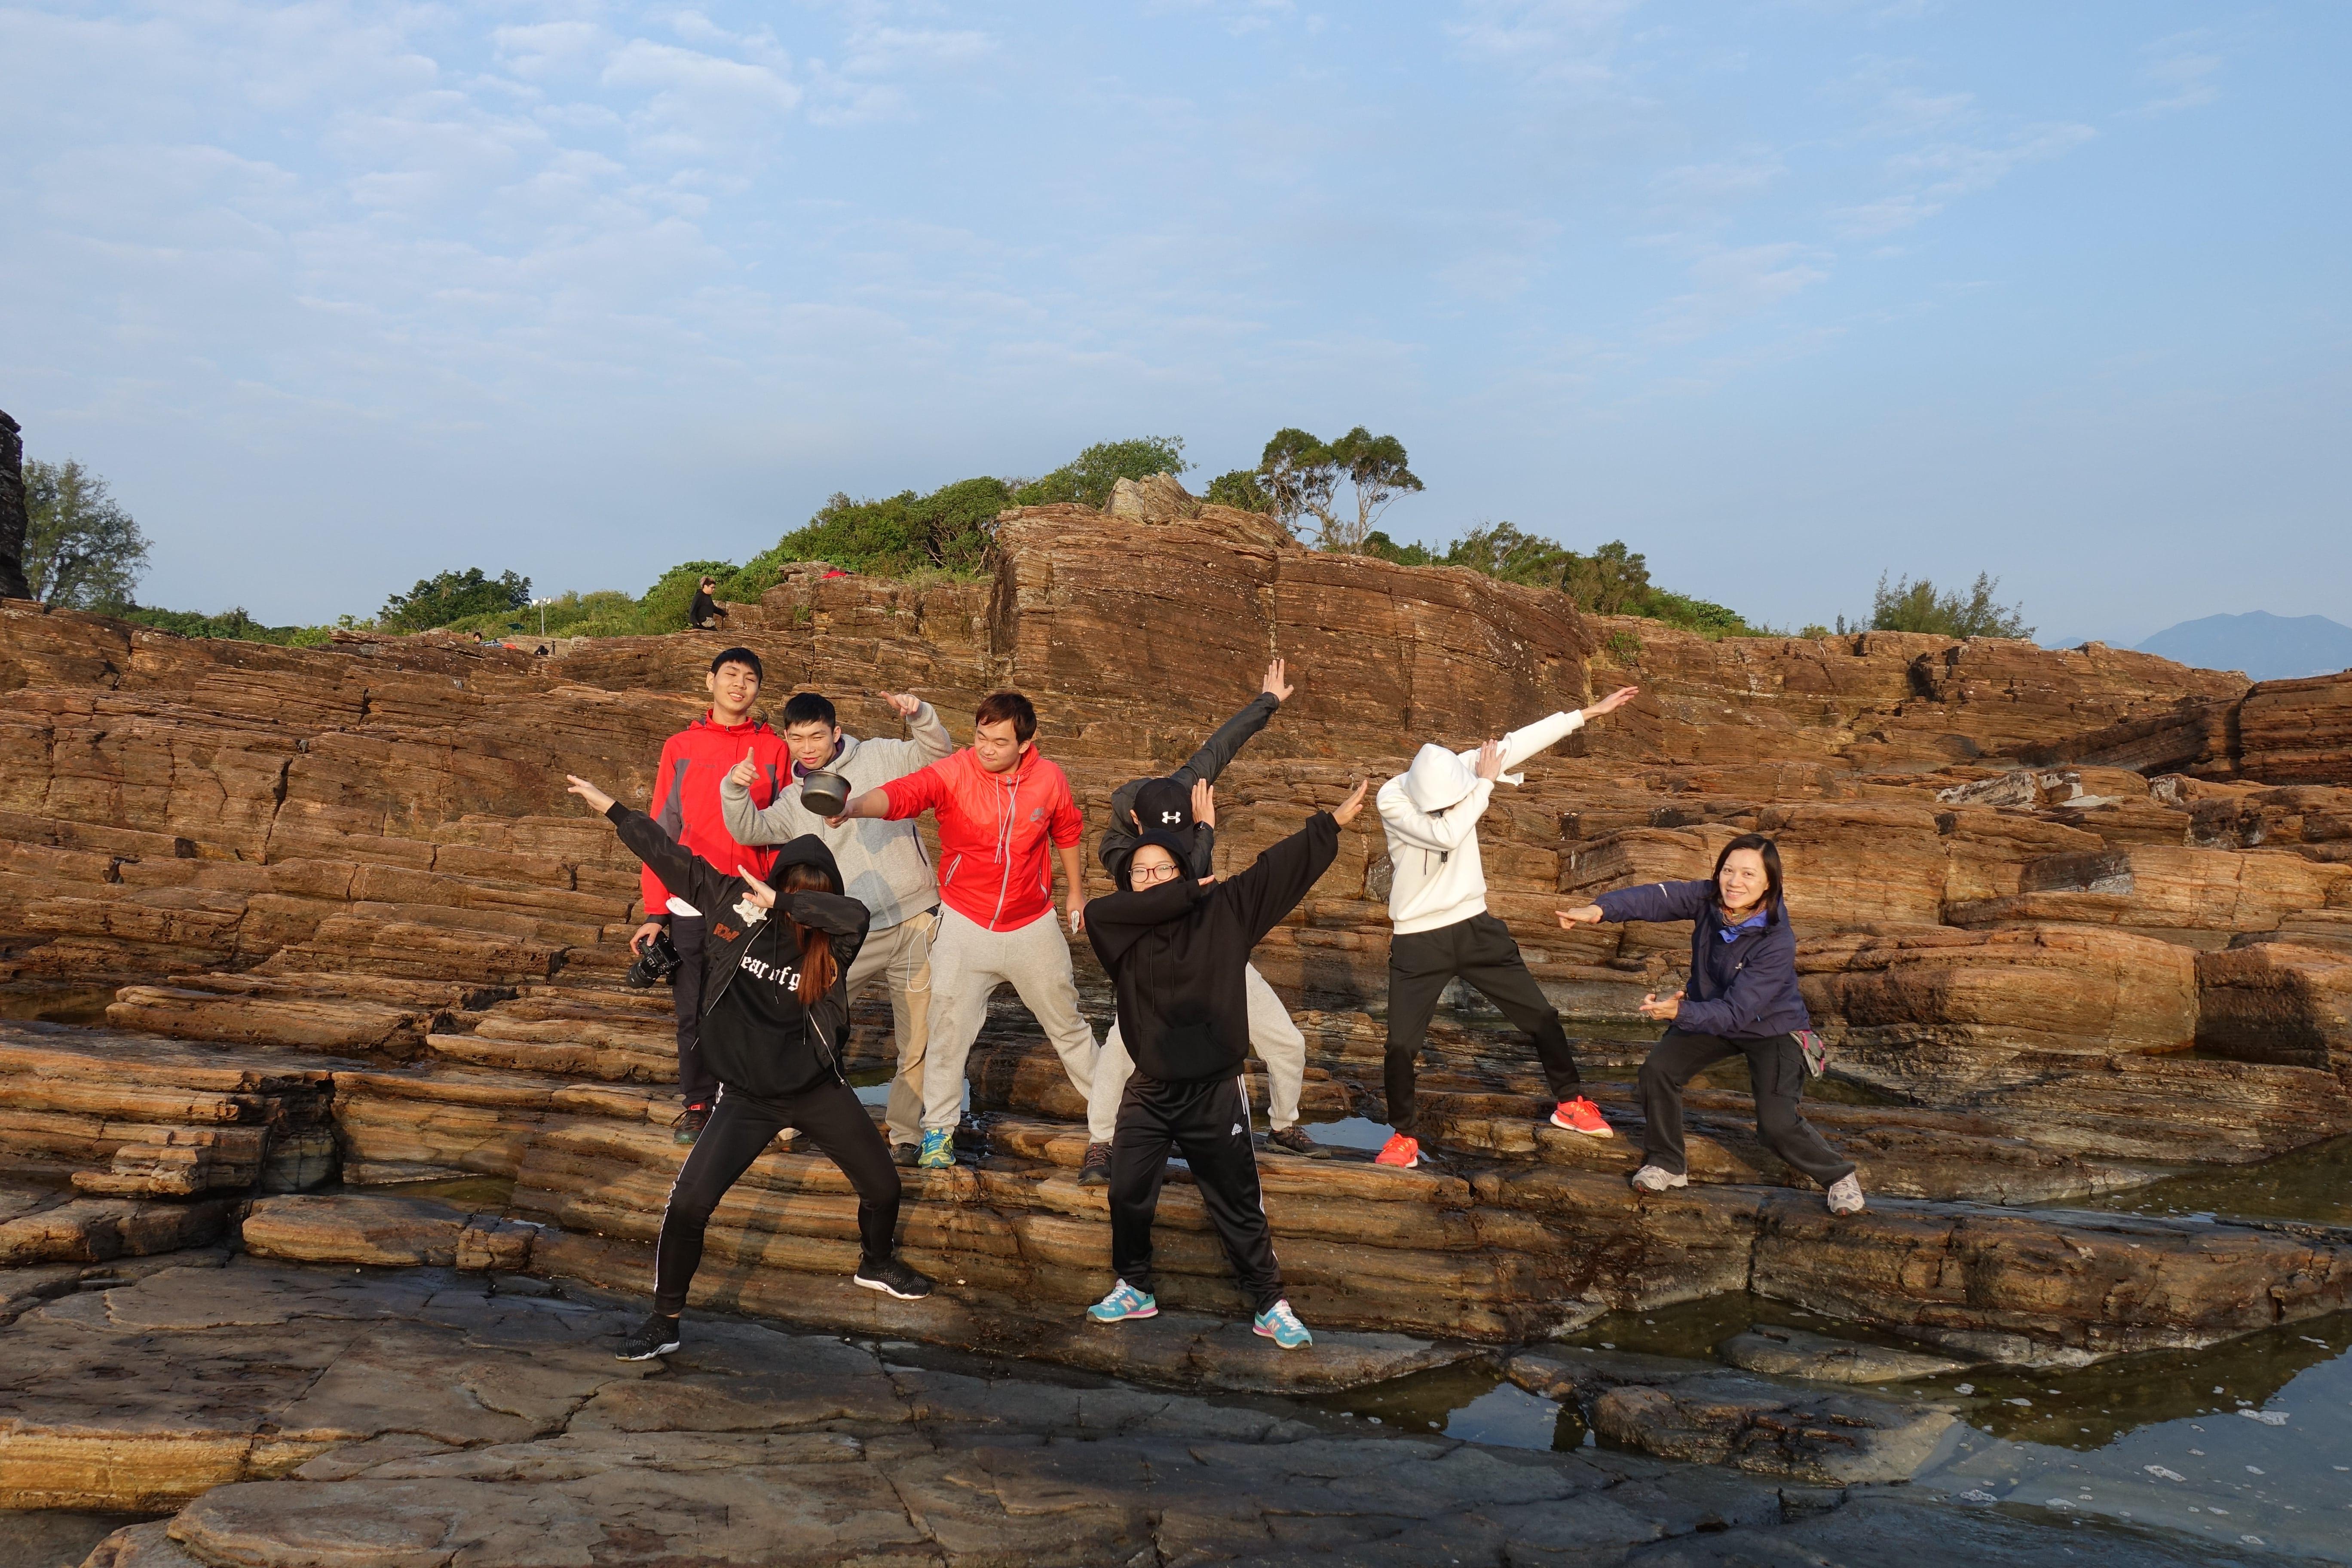 Students enjoyed the sun rise after hiking in Tung Ping Chau